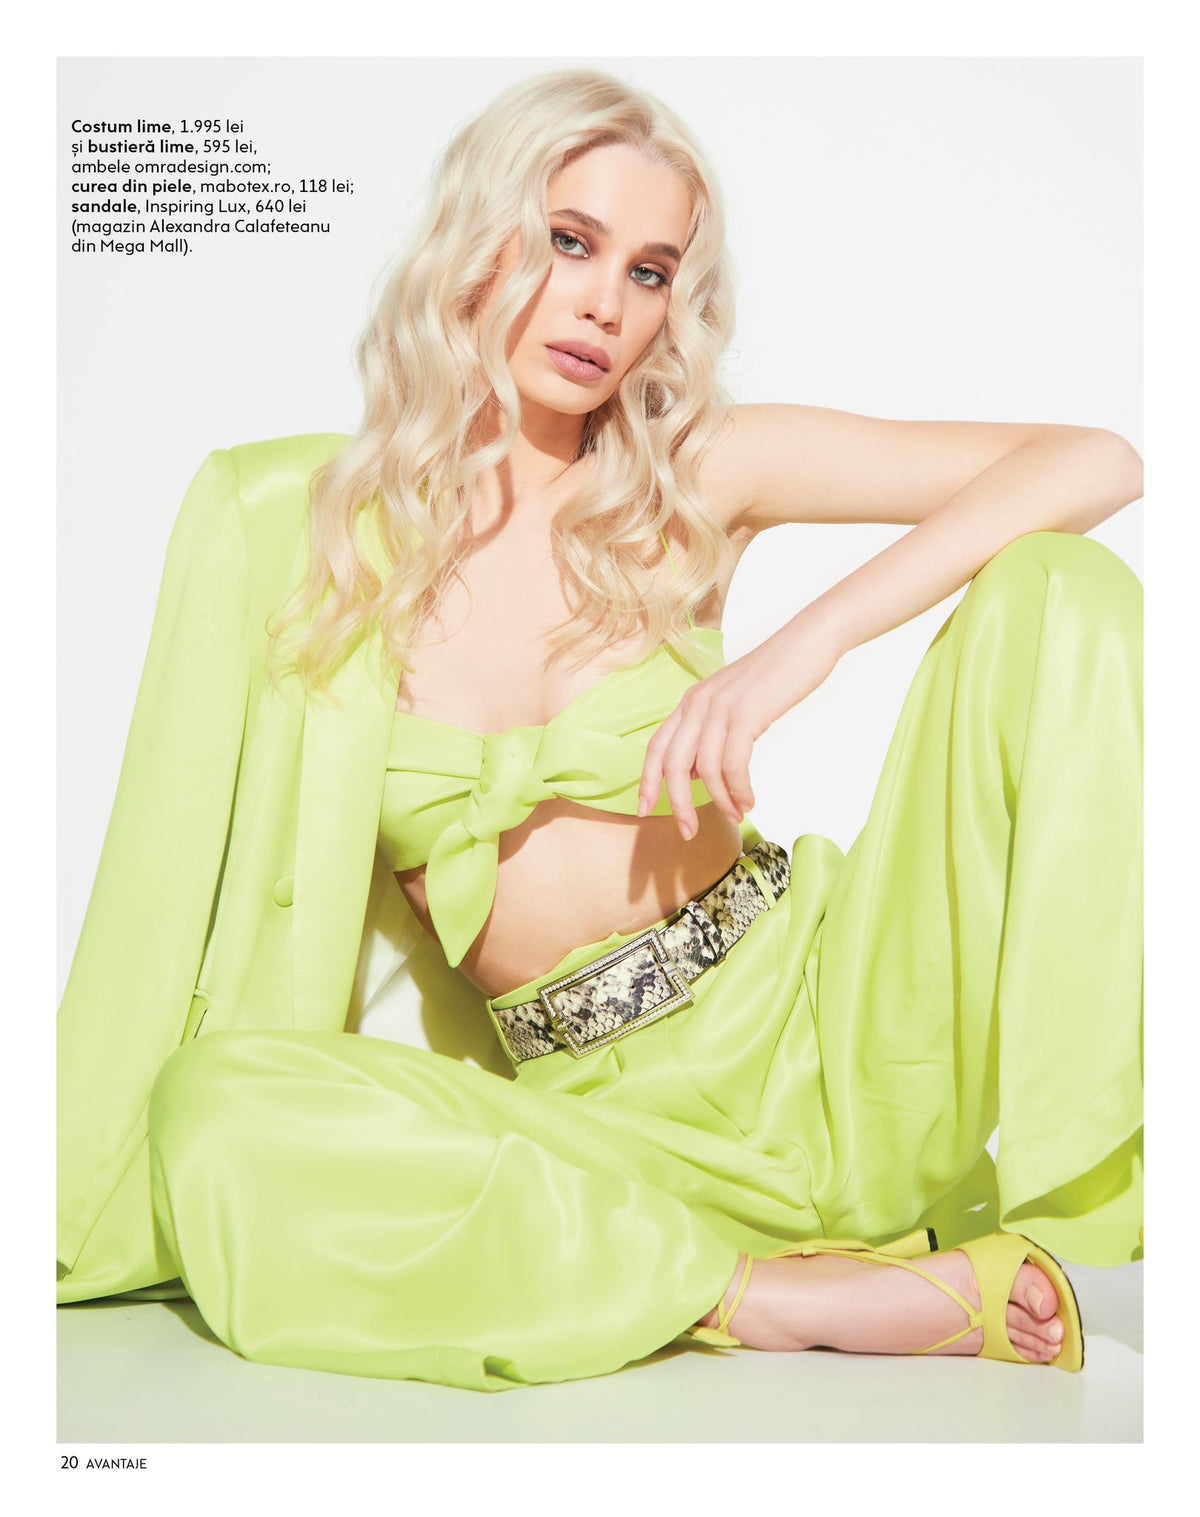 Limoncello suit and top featured in Avantaje Magazine